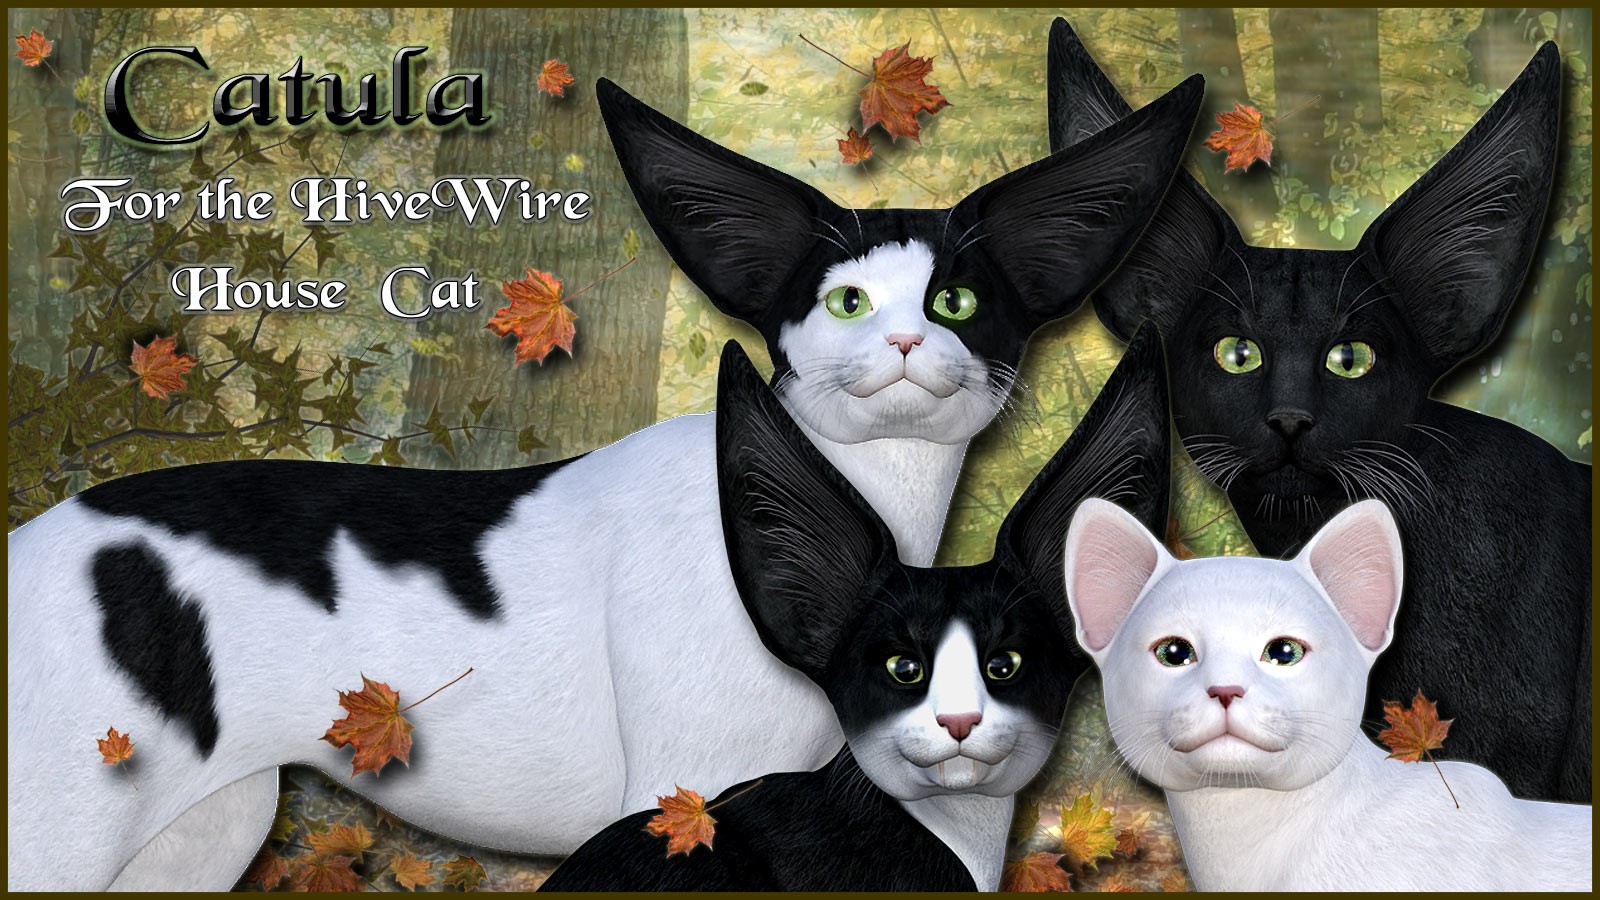 11713-catula-for-the-hivewire-house-cat-main.jpg